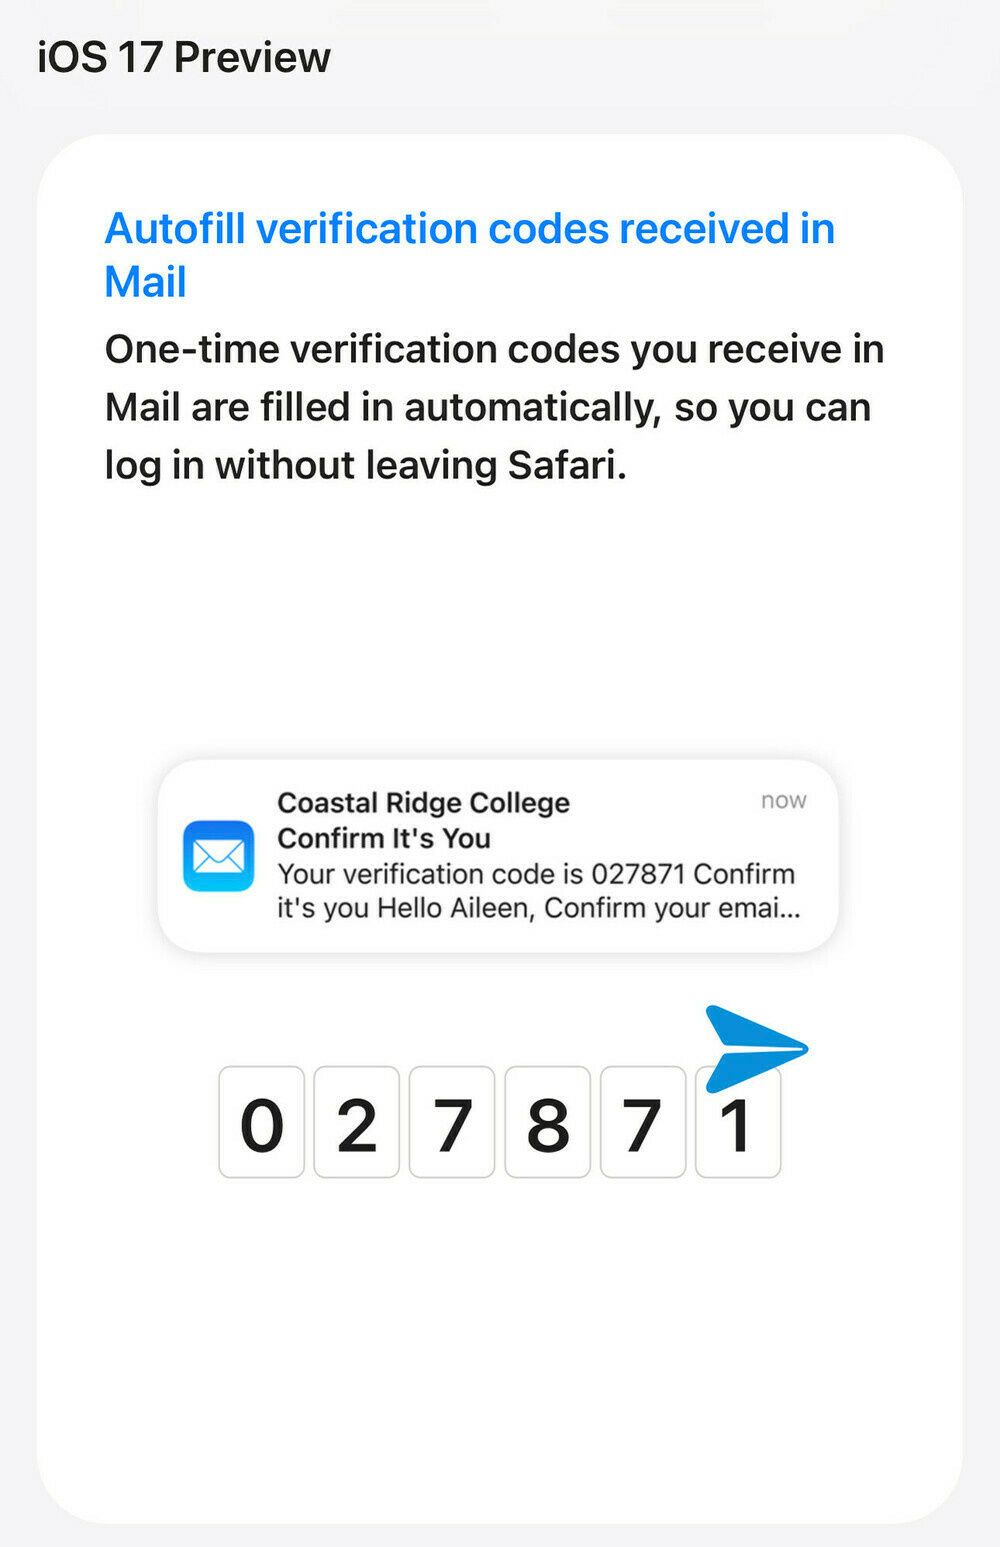 Screenshot of new iOS 17 feature: Autofill verification codes received in
Mail - One-time verification codes you receive in Mail are filled in automatically, so you can log in without leaving Safari.